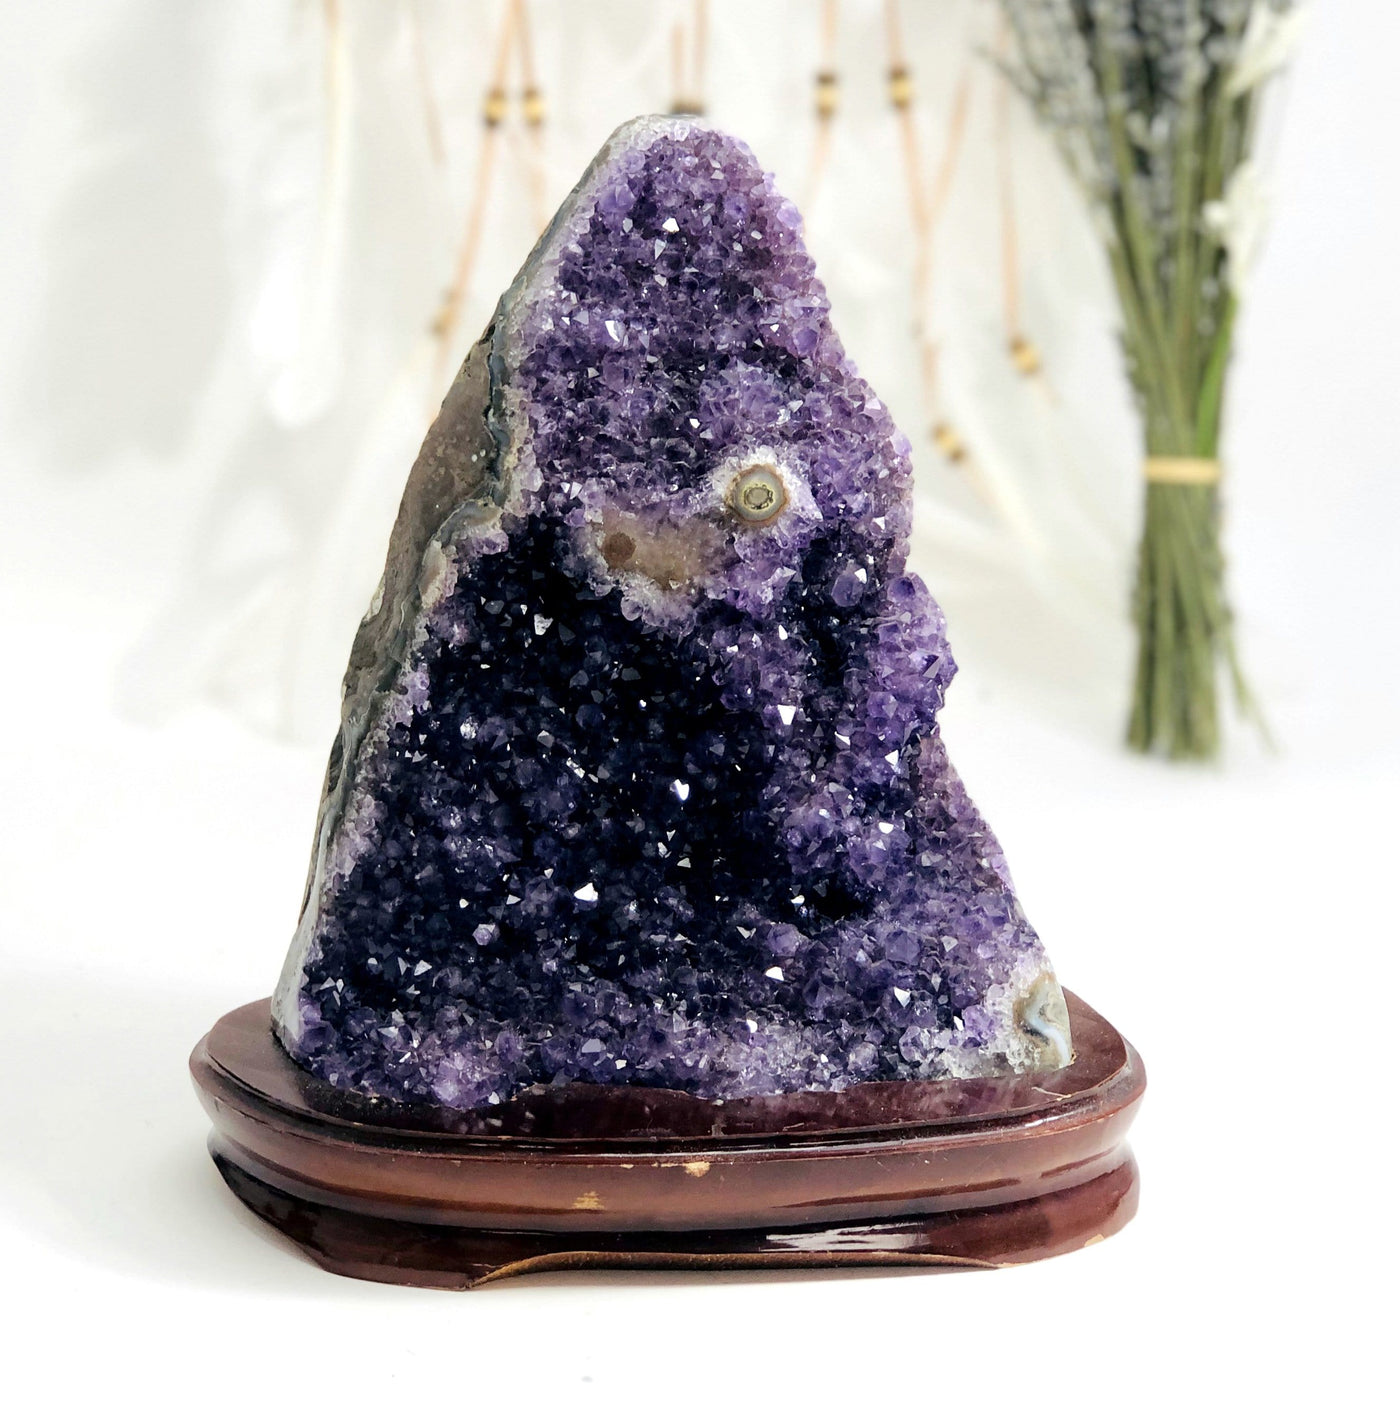 Amethyst Cluster on Wooden Base with decorations in the background